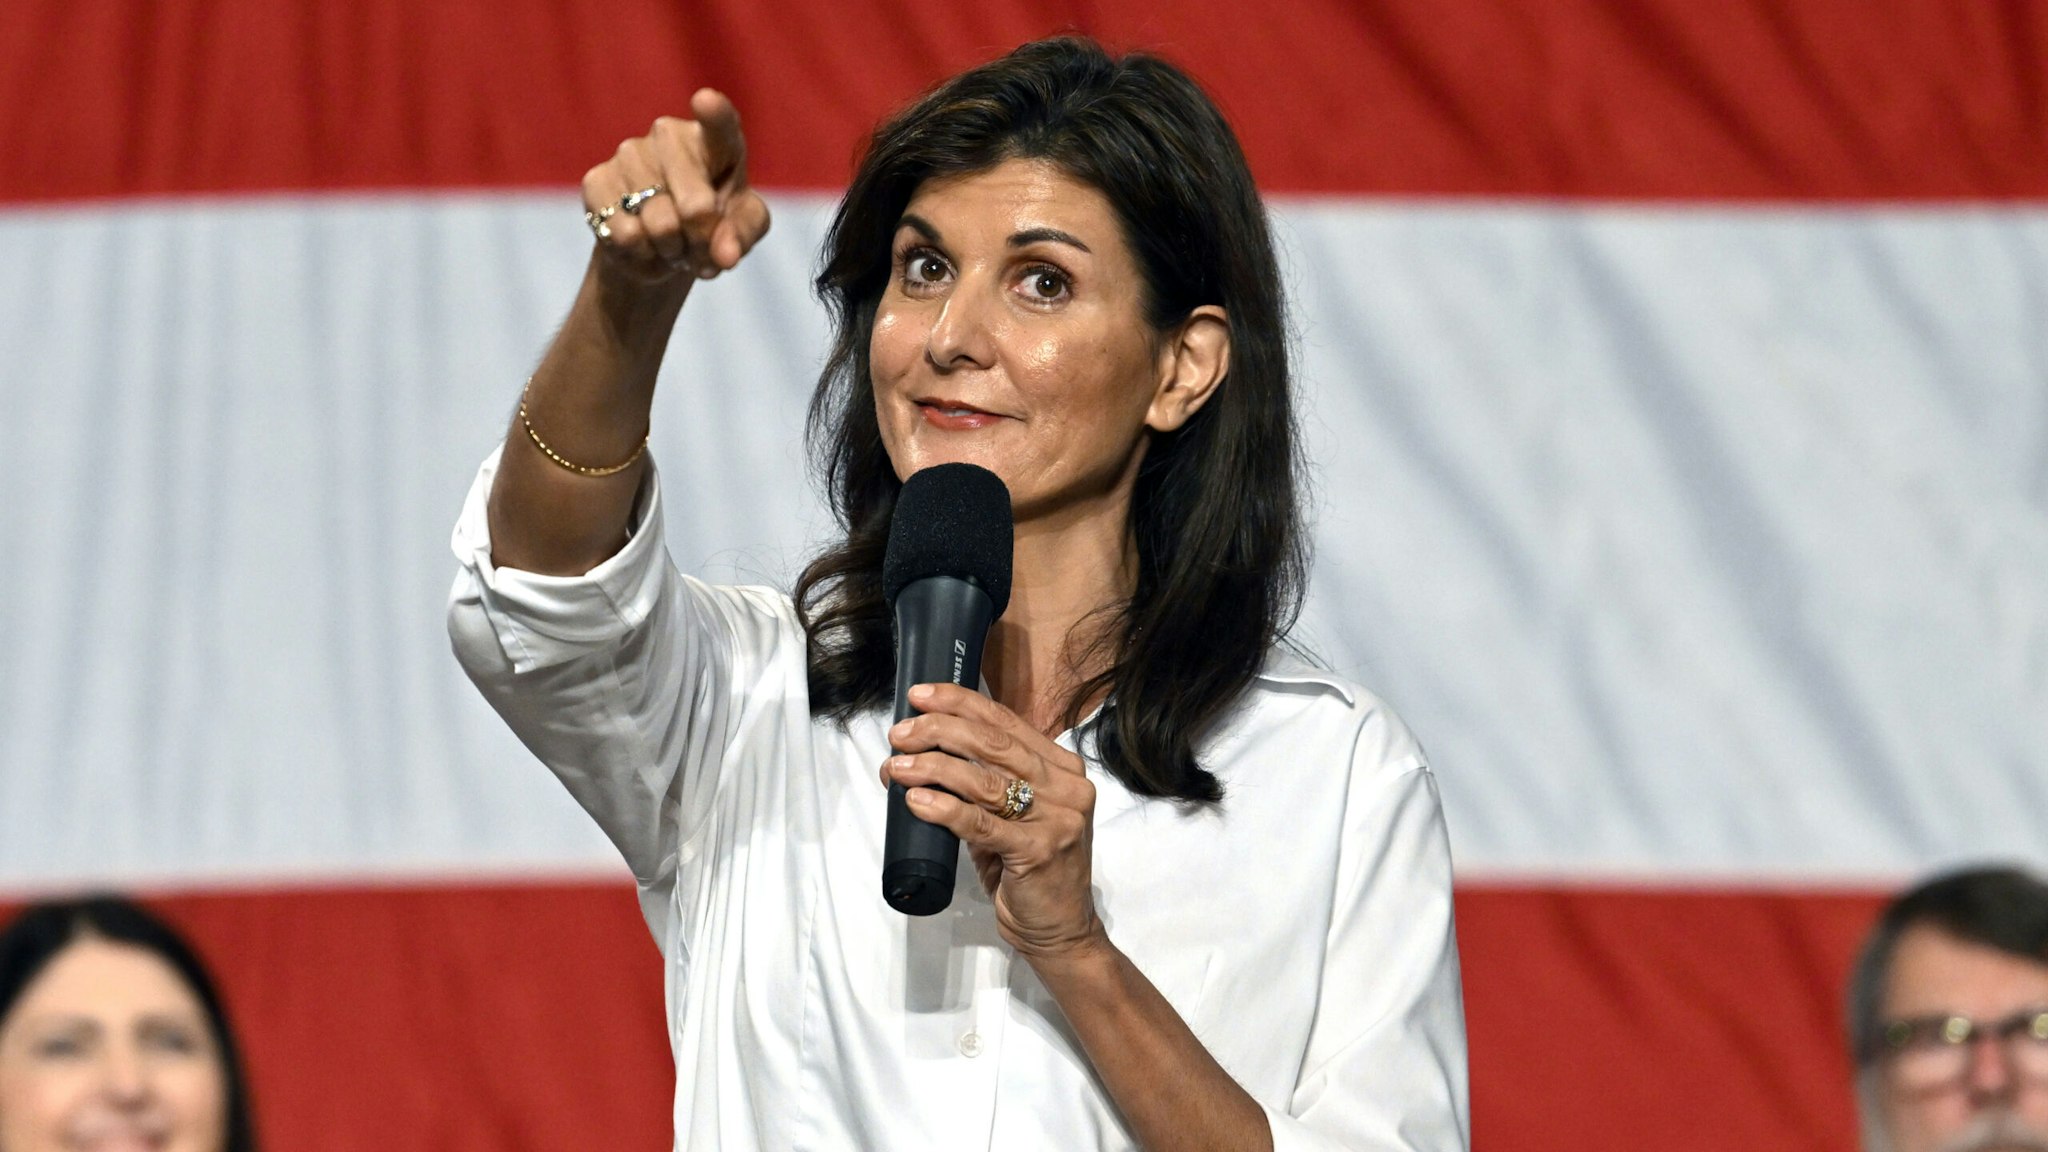 INDIAN LAND, SOUTH CAROLINA, UNITED STATES - AUGUST 28: Following a strong performance in the first Republican Presidential Debate, candidate Nikki Haley launches South Carolina swing and holds a town hall with Rep. Ralph Norman and South Carolina Rep. Mike Neese in Indian Land, Lancaster County, South Carolina, United States on August 28, 2023.